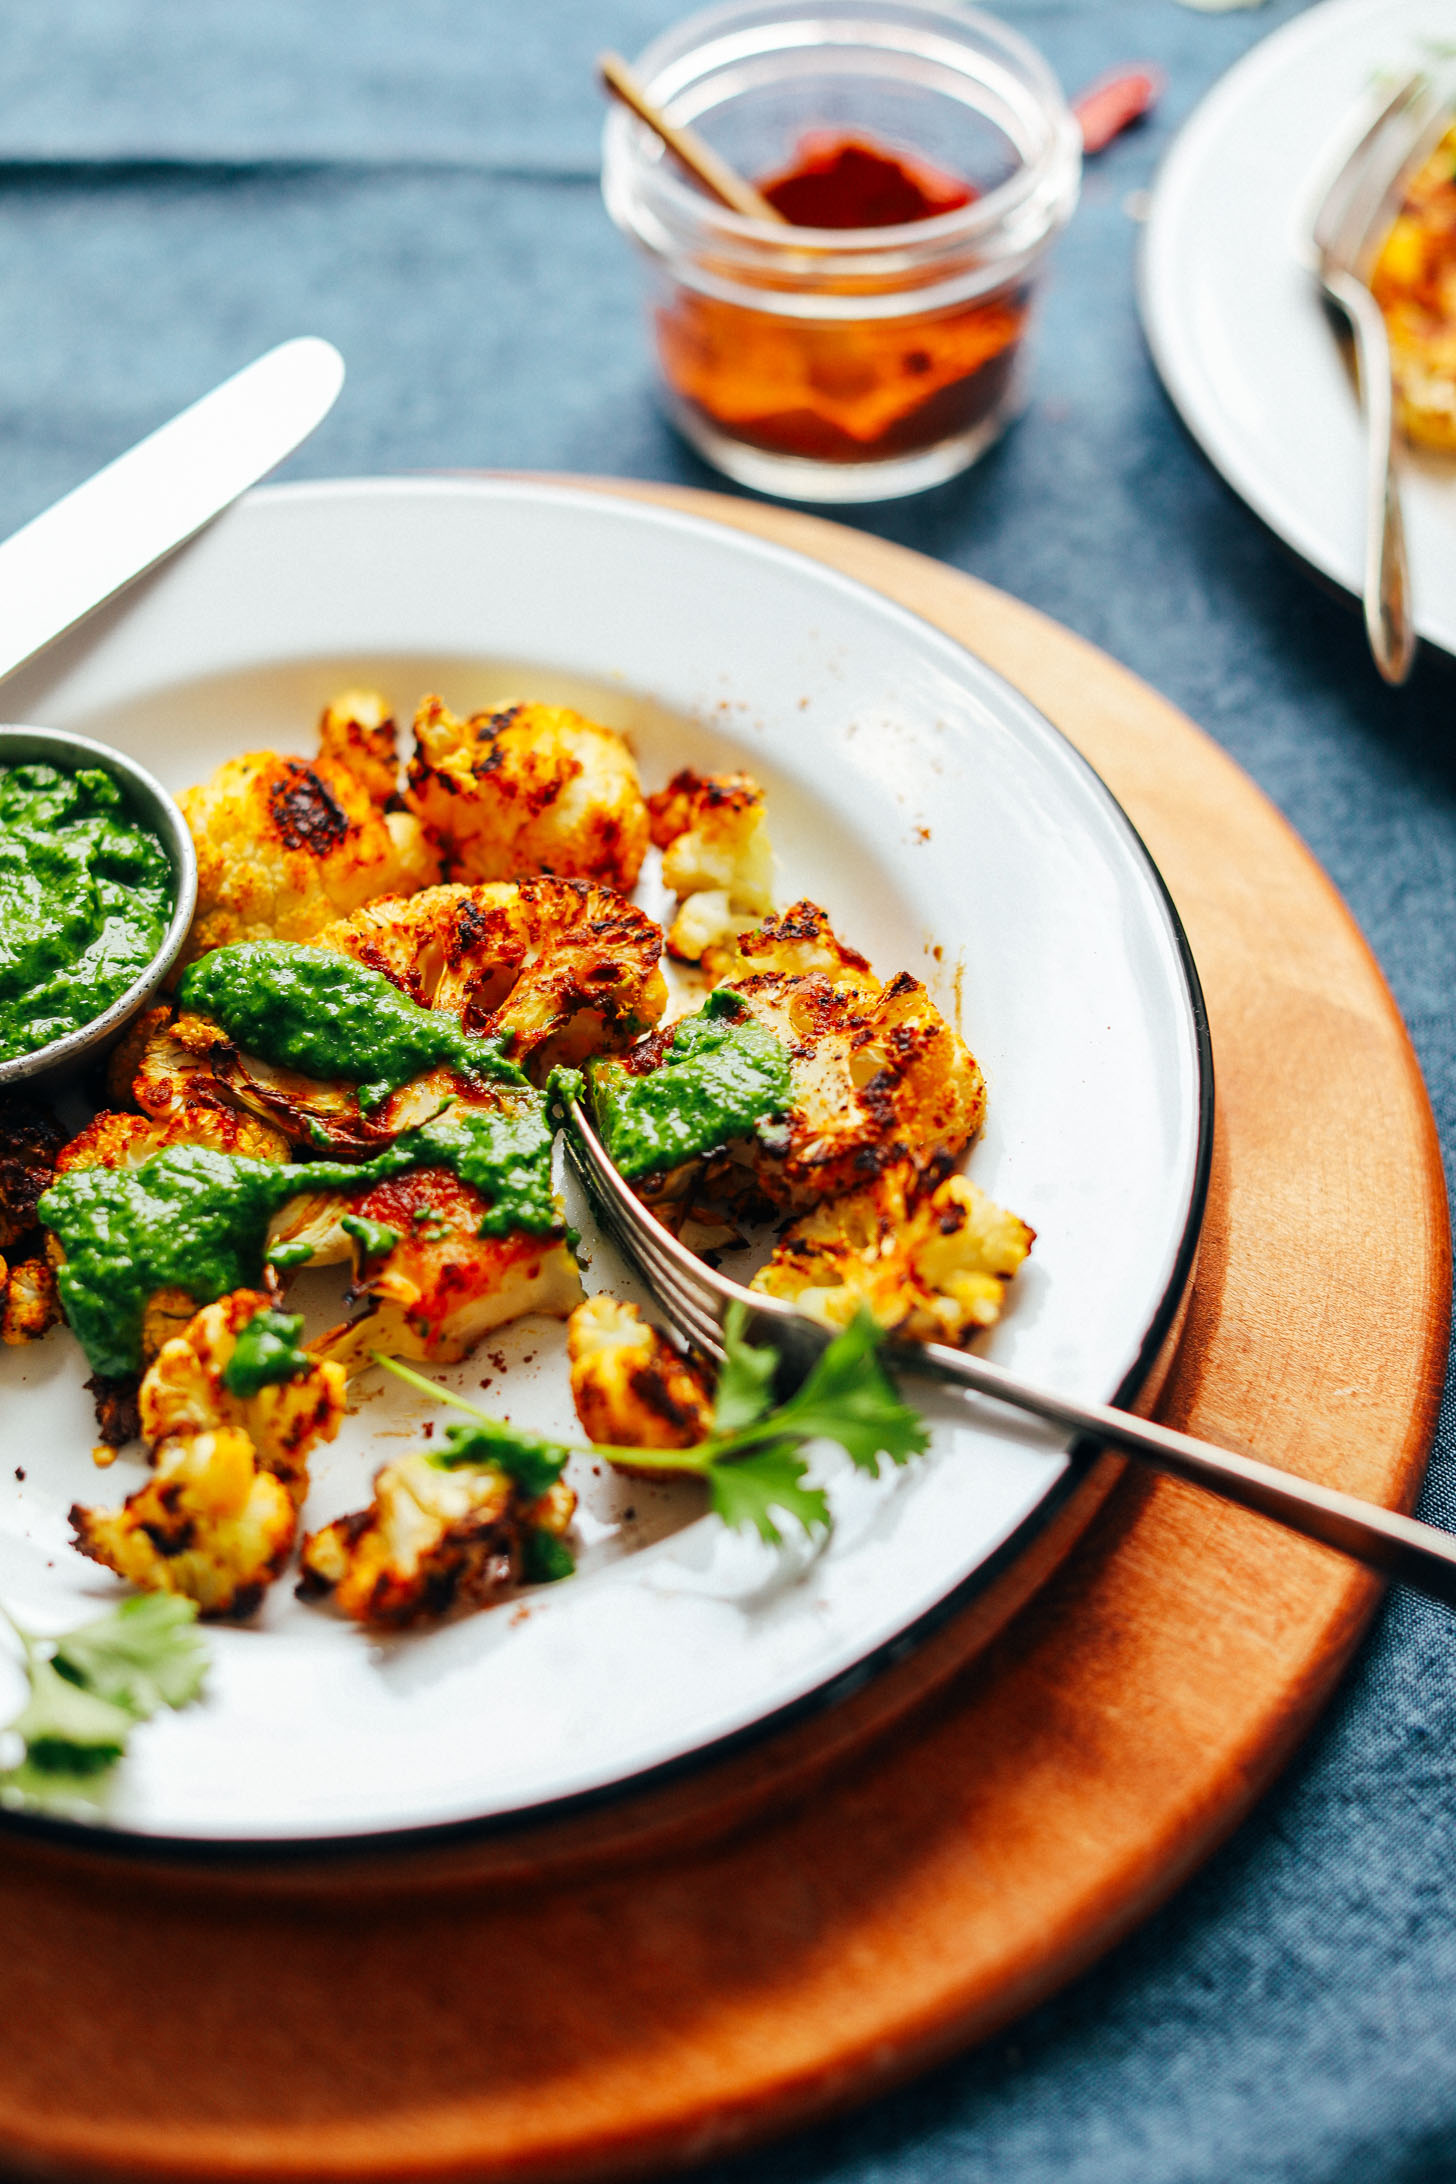 Using a fork to cut into a Shawarma Roasted Cauliflower Steak drizzled with green chutney